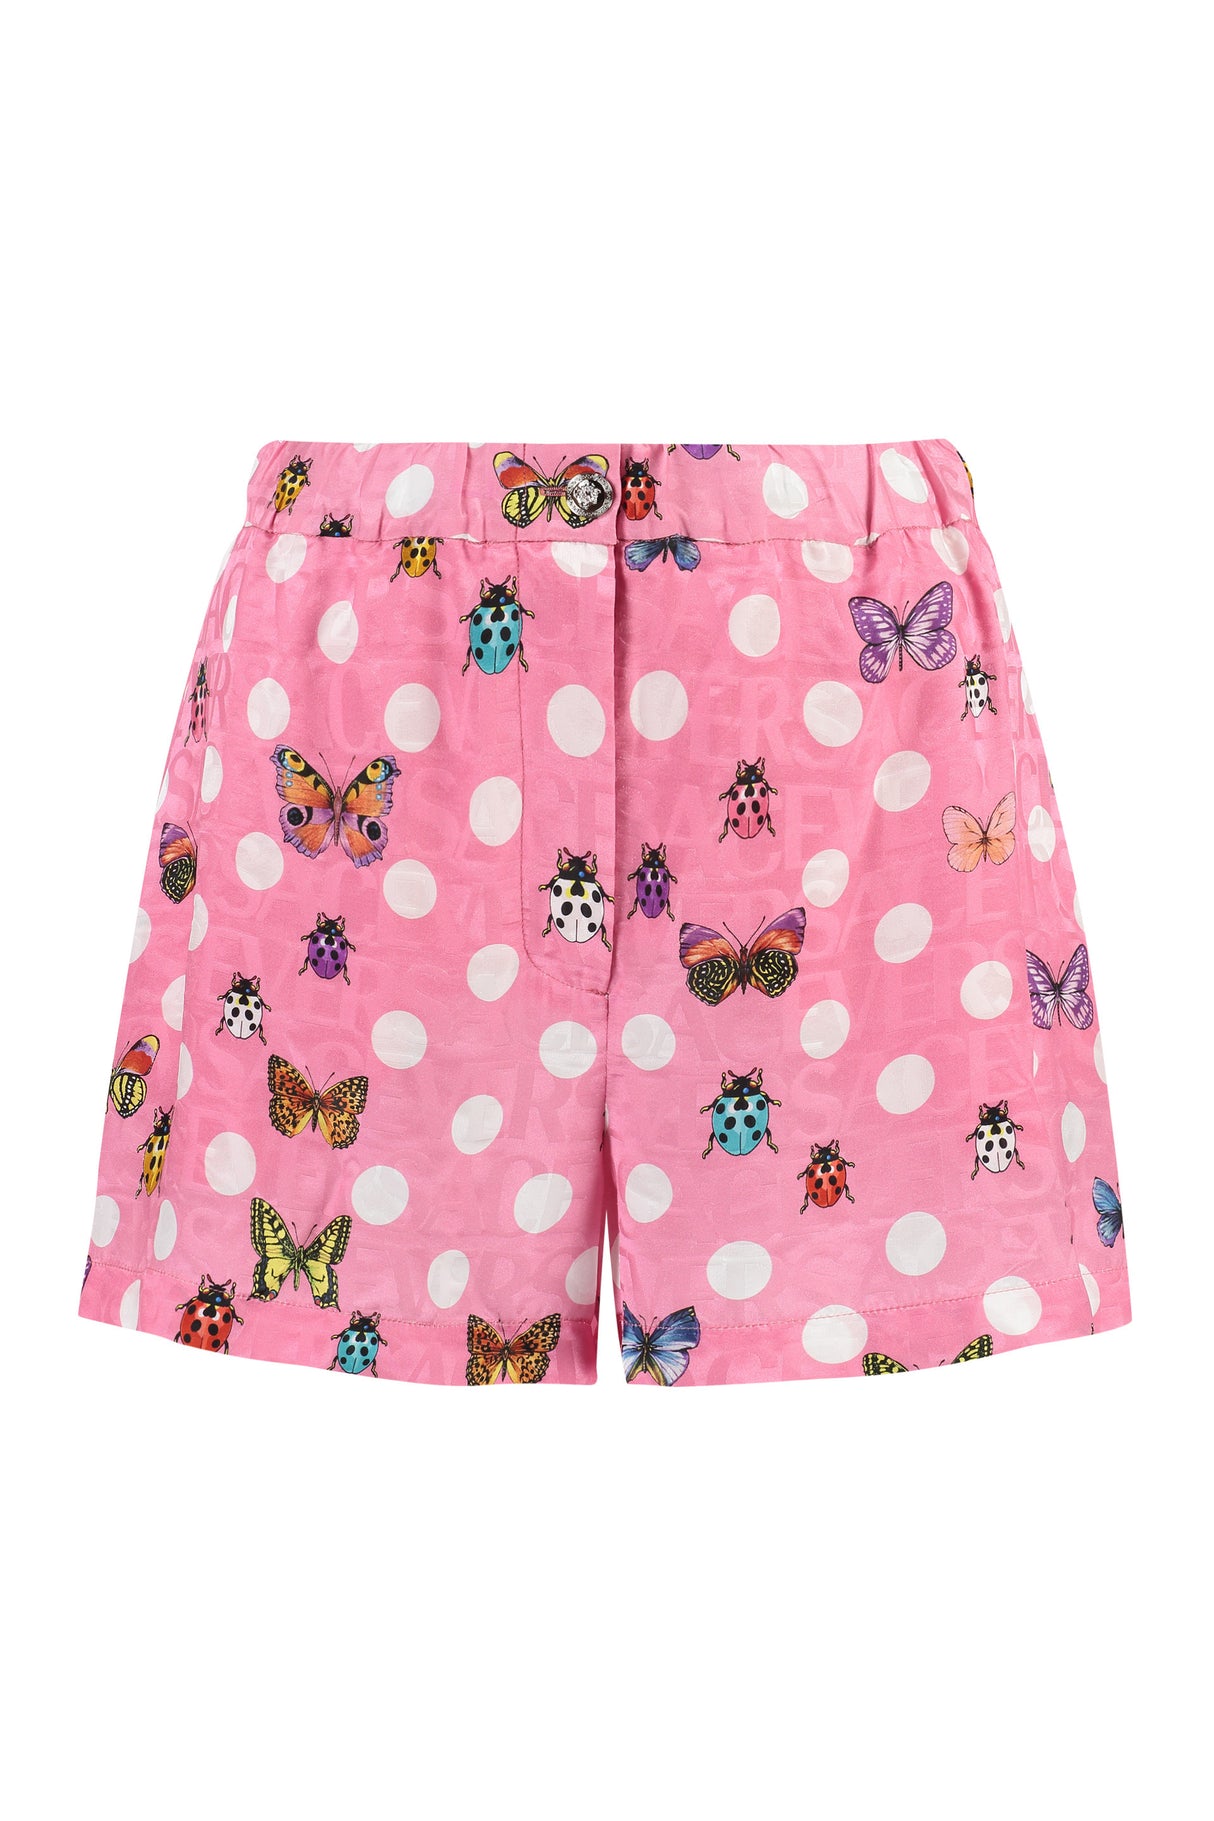 VERSACE Versatile Pink Heritage Shorts with Butterflies and Ladybugs Print